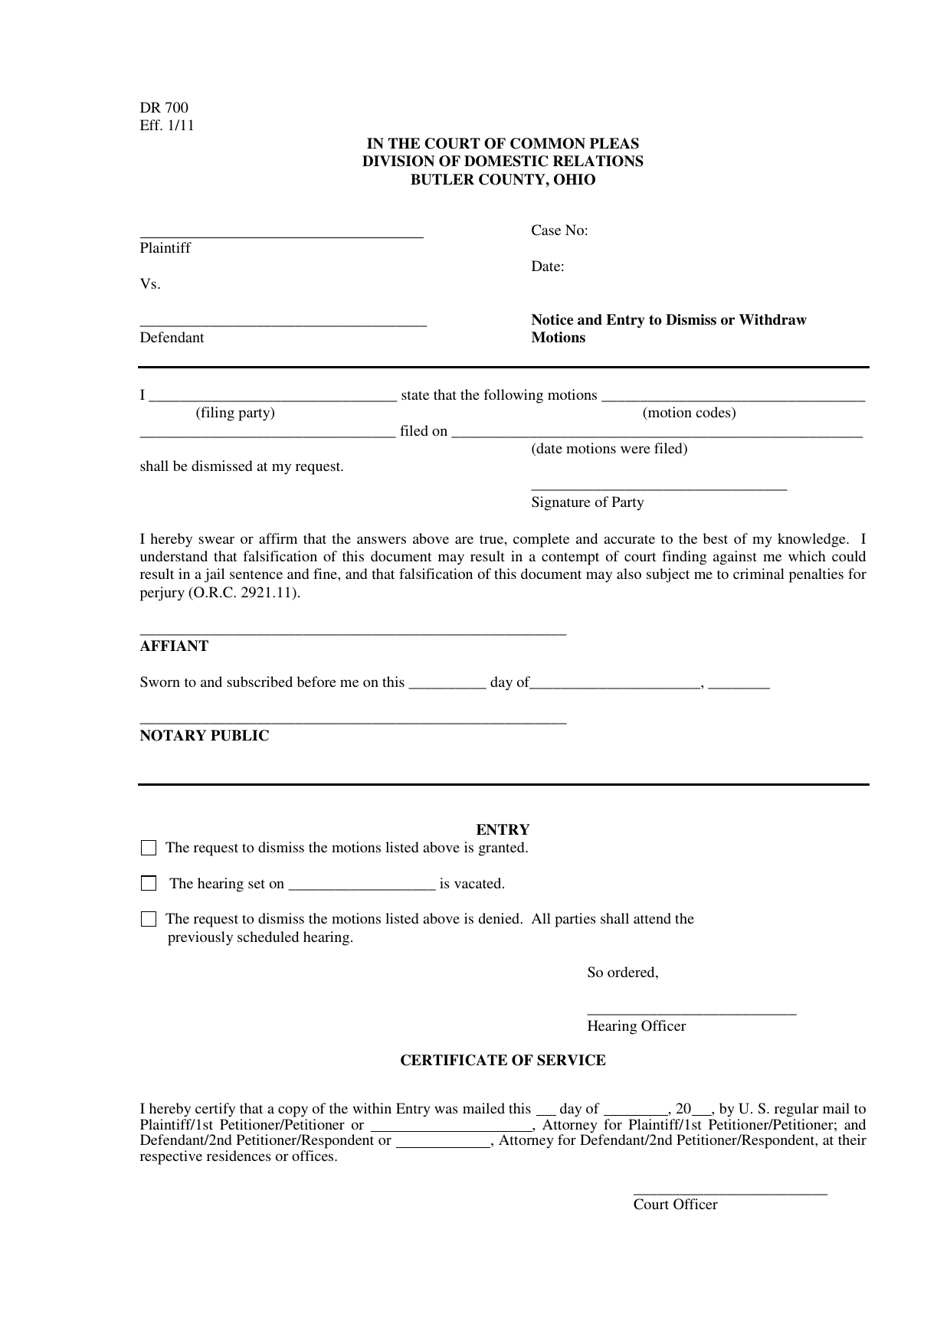 Form DR700 Notice and Entry to Dismiss or Withdraw Motions - Butler County, Ohio, Page 1